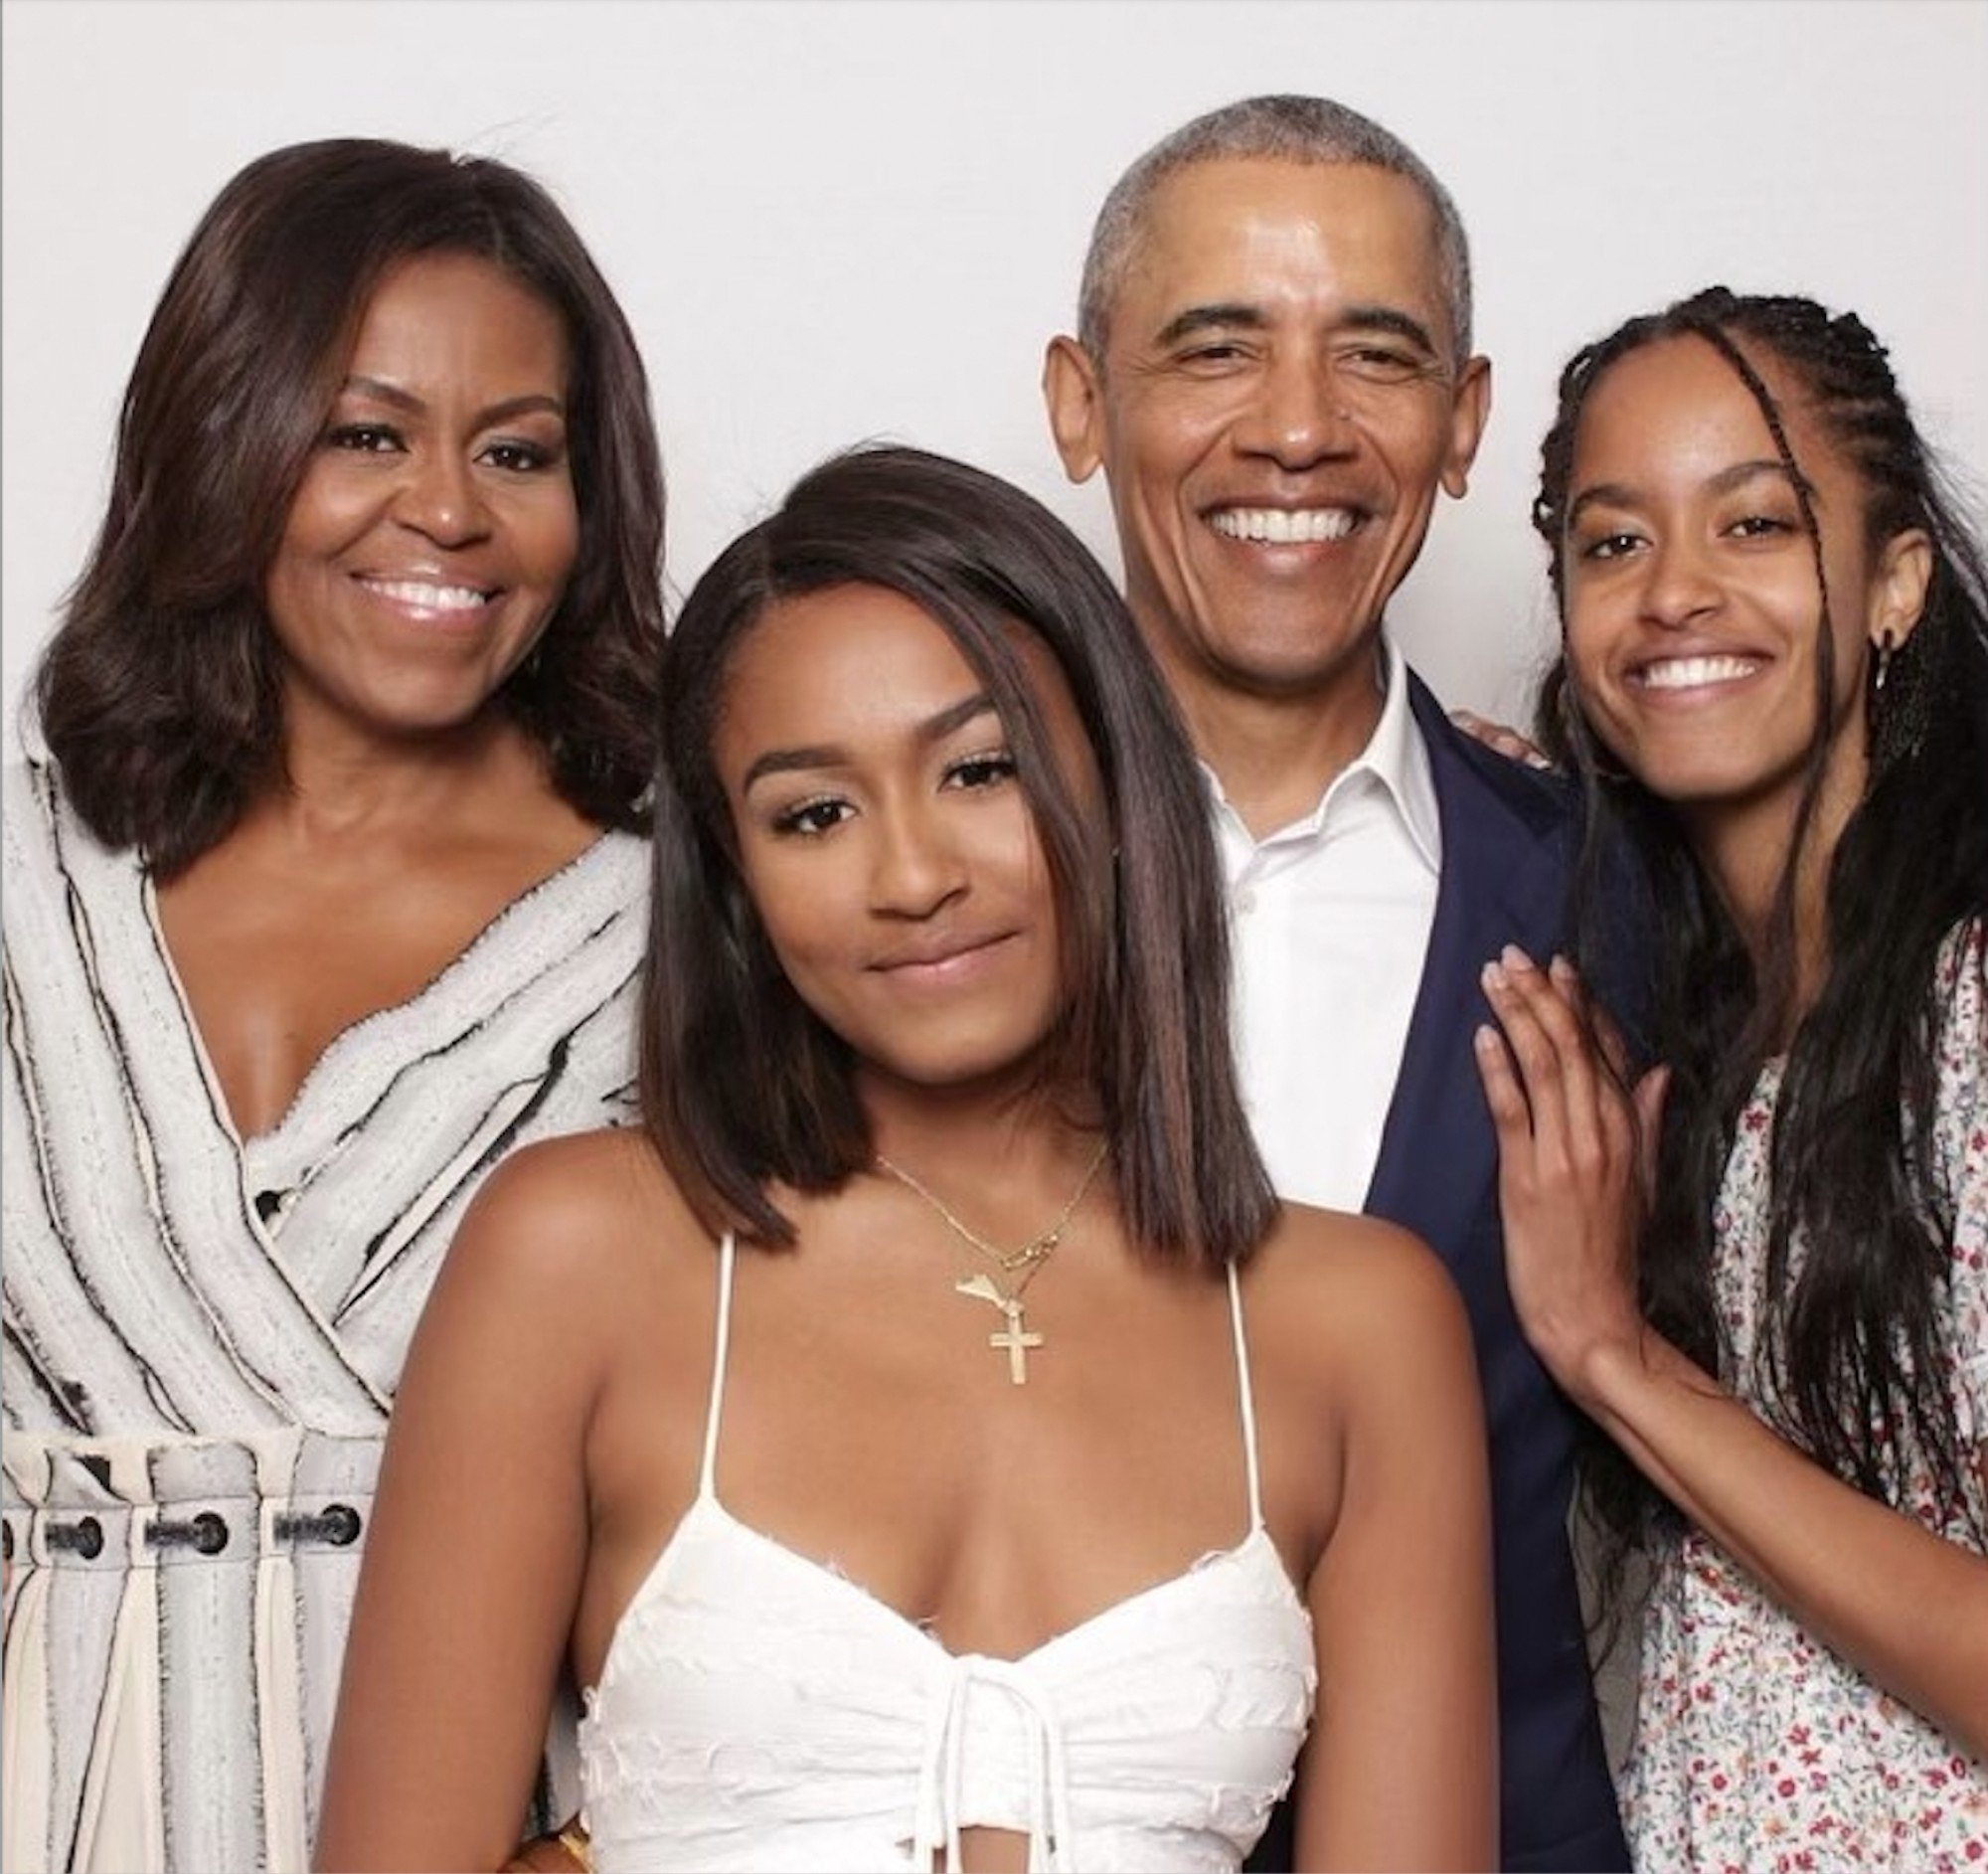 Malia And Sasha Obama S Post White House Life Barack And Michelle S Gen Z Daughters Live In Los